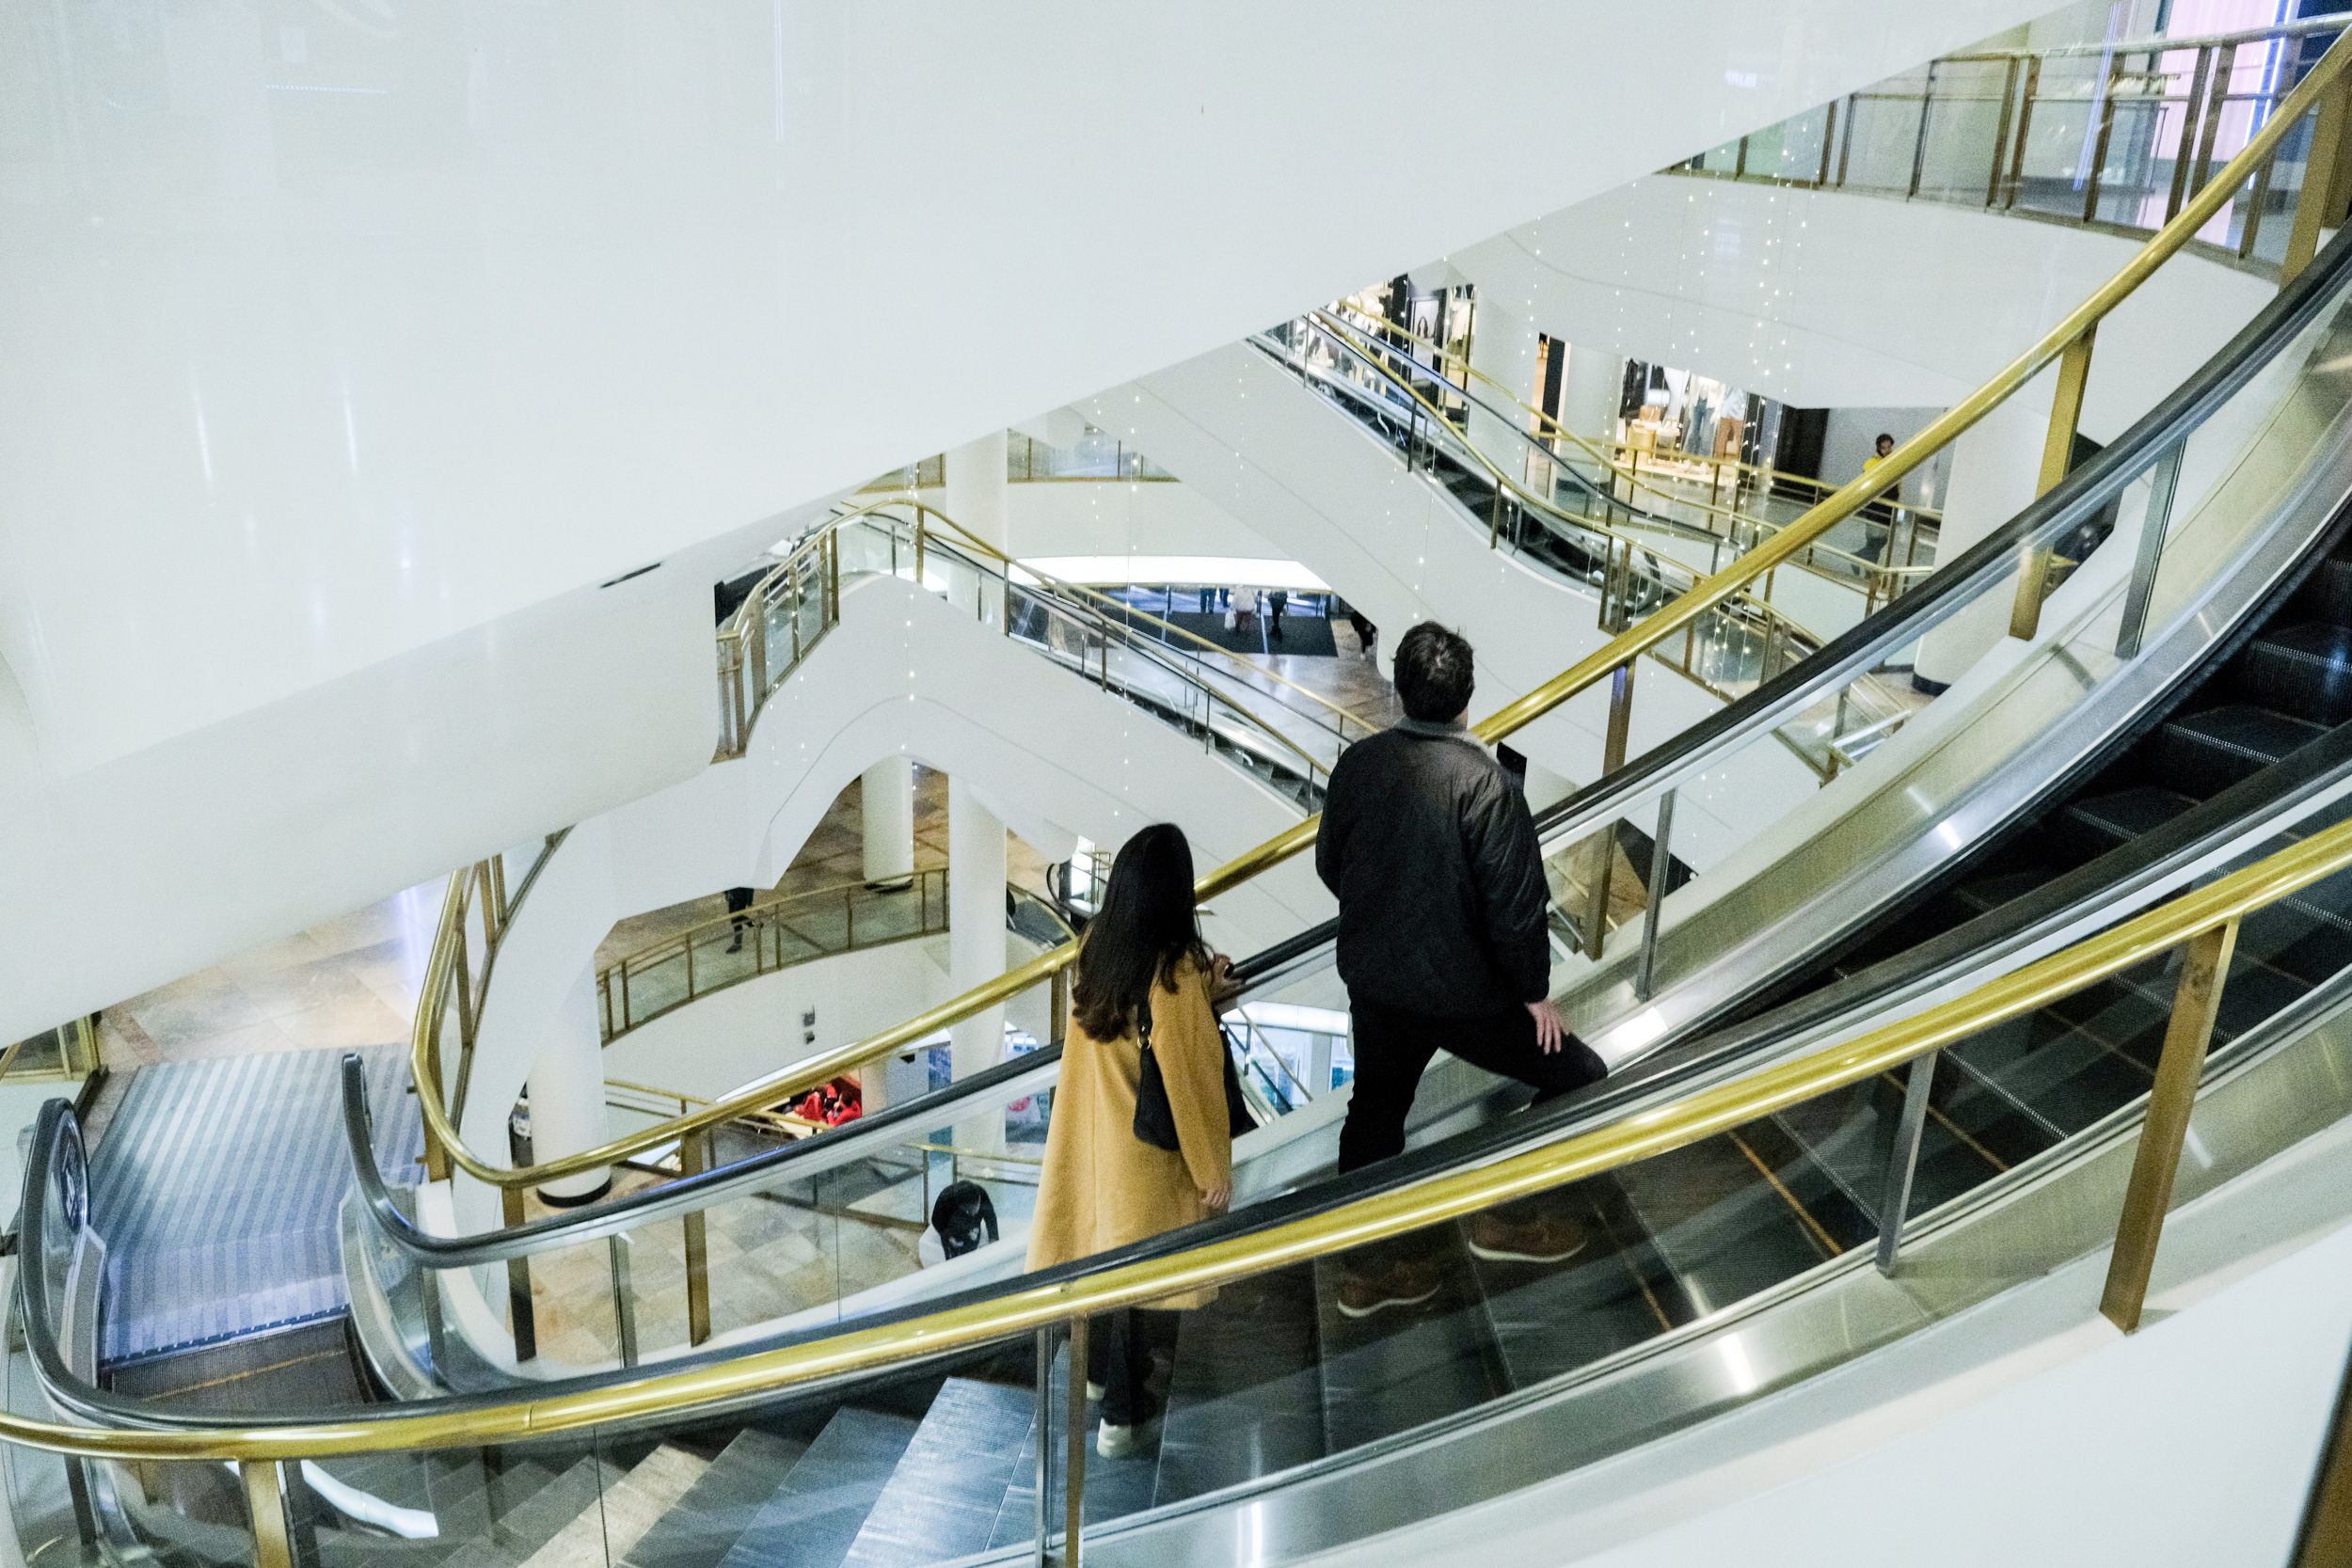 Two people, one in a black jacket and the other in a yellow coat, are on an ascending escalator in a modern multi-level shopping mall with white interiors and glass railings.